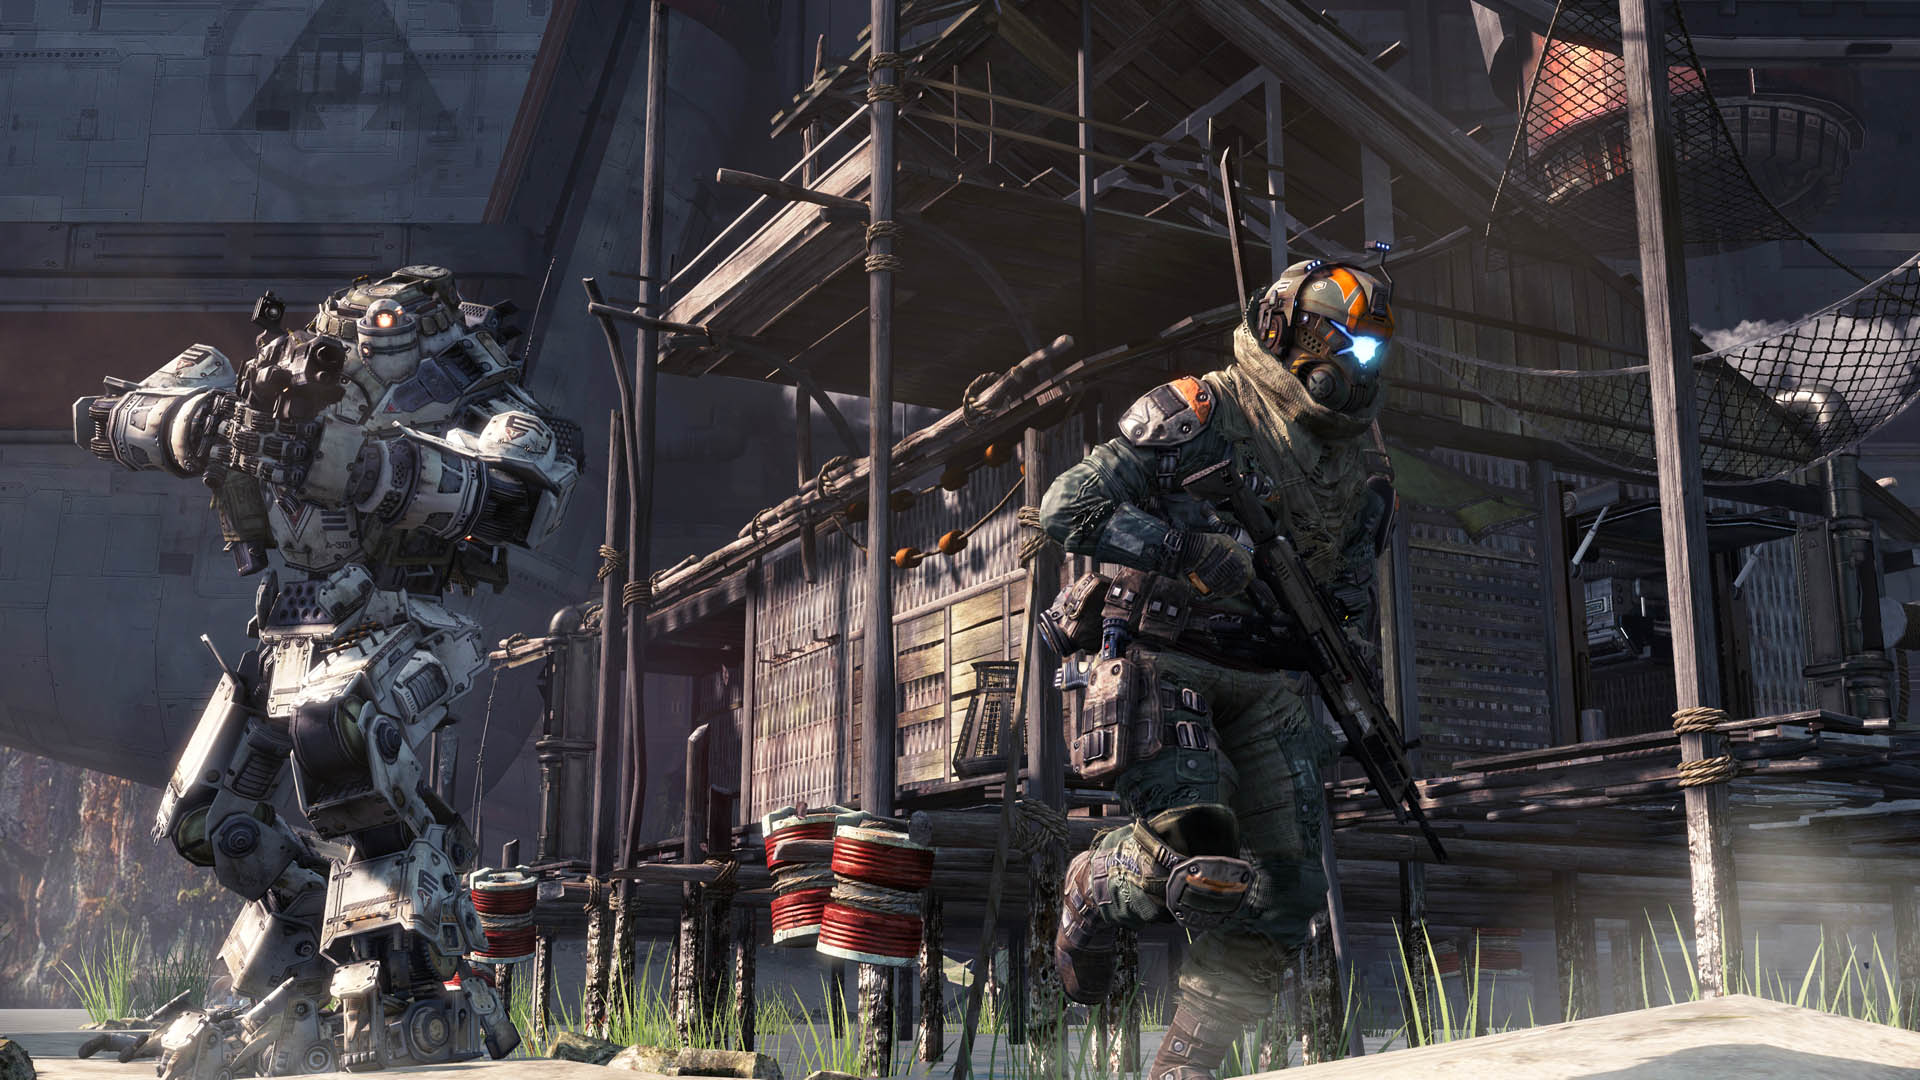 “Titanfall” Releases Patch Featuring Private Mode and Weapon Balance Changes - Complete Patch Notes Inside